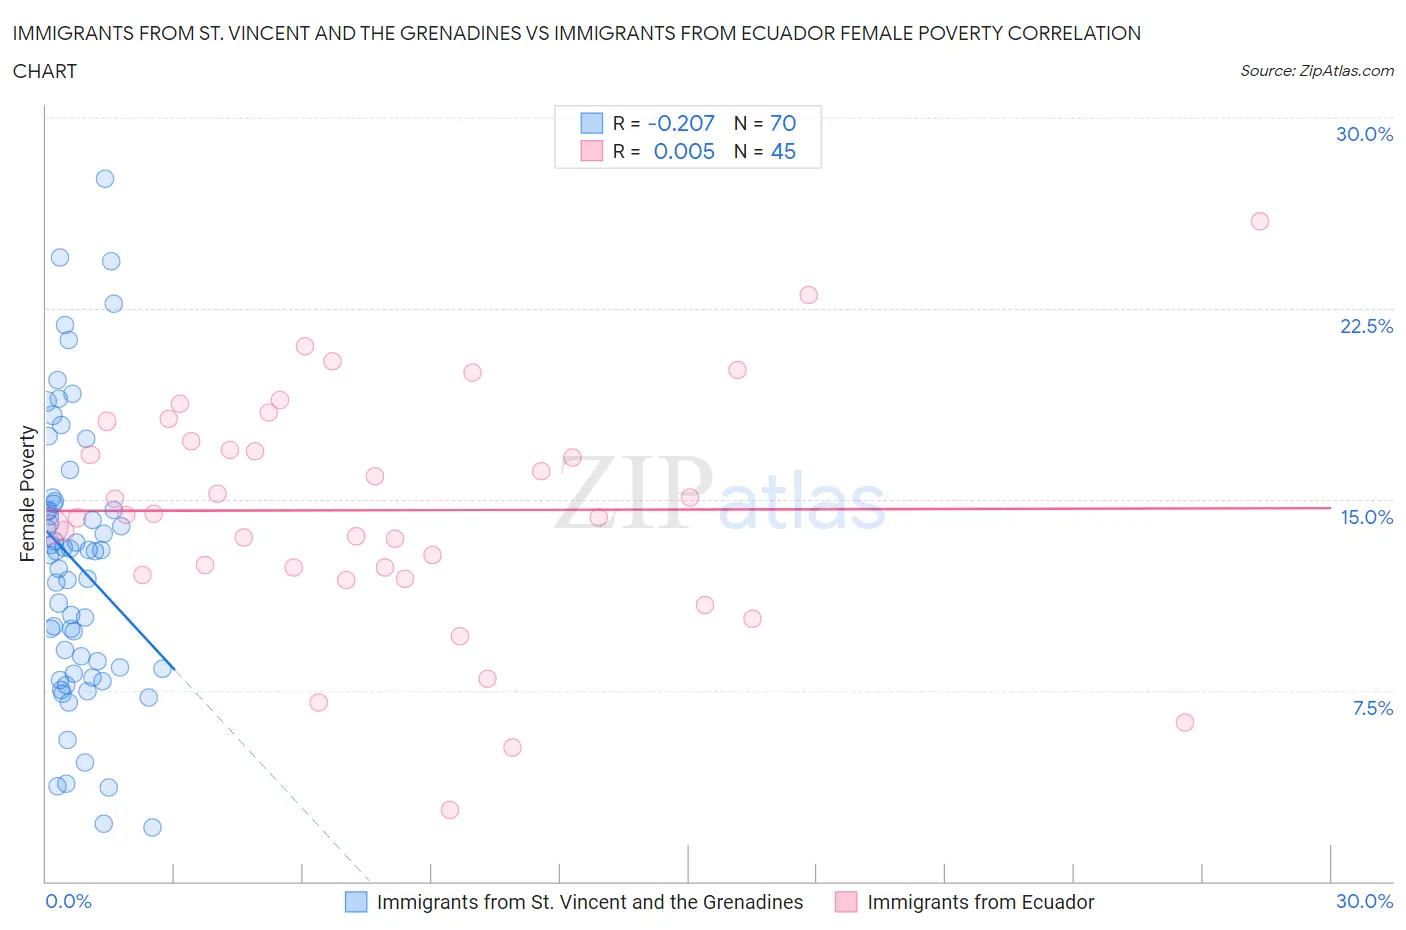 Immigrants from St. Vincent and the Grenadines vs Immigrants from Ecuador Female Poverty